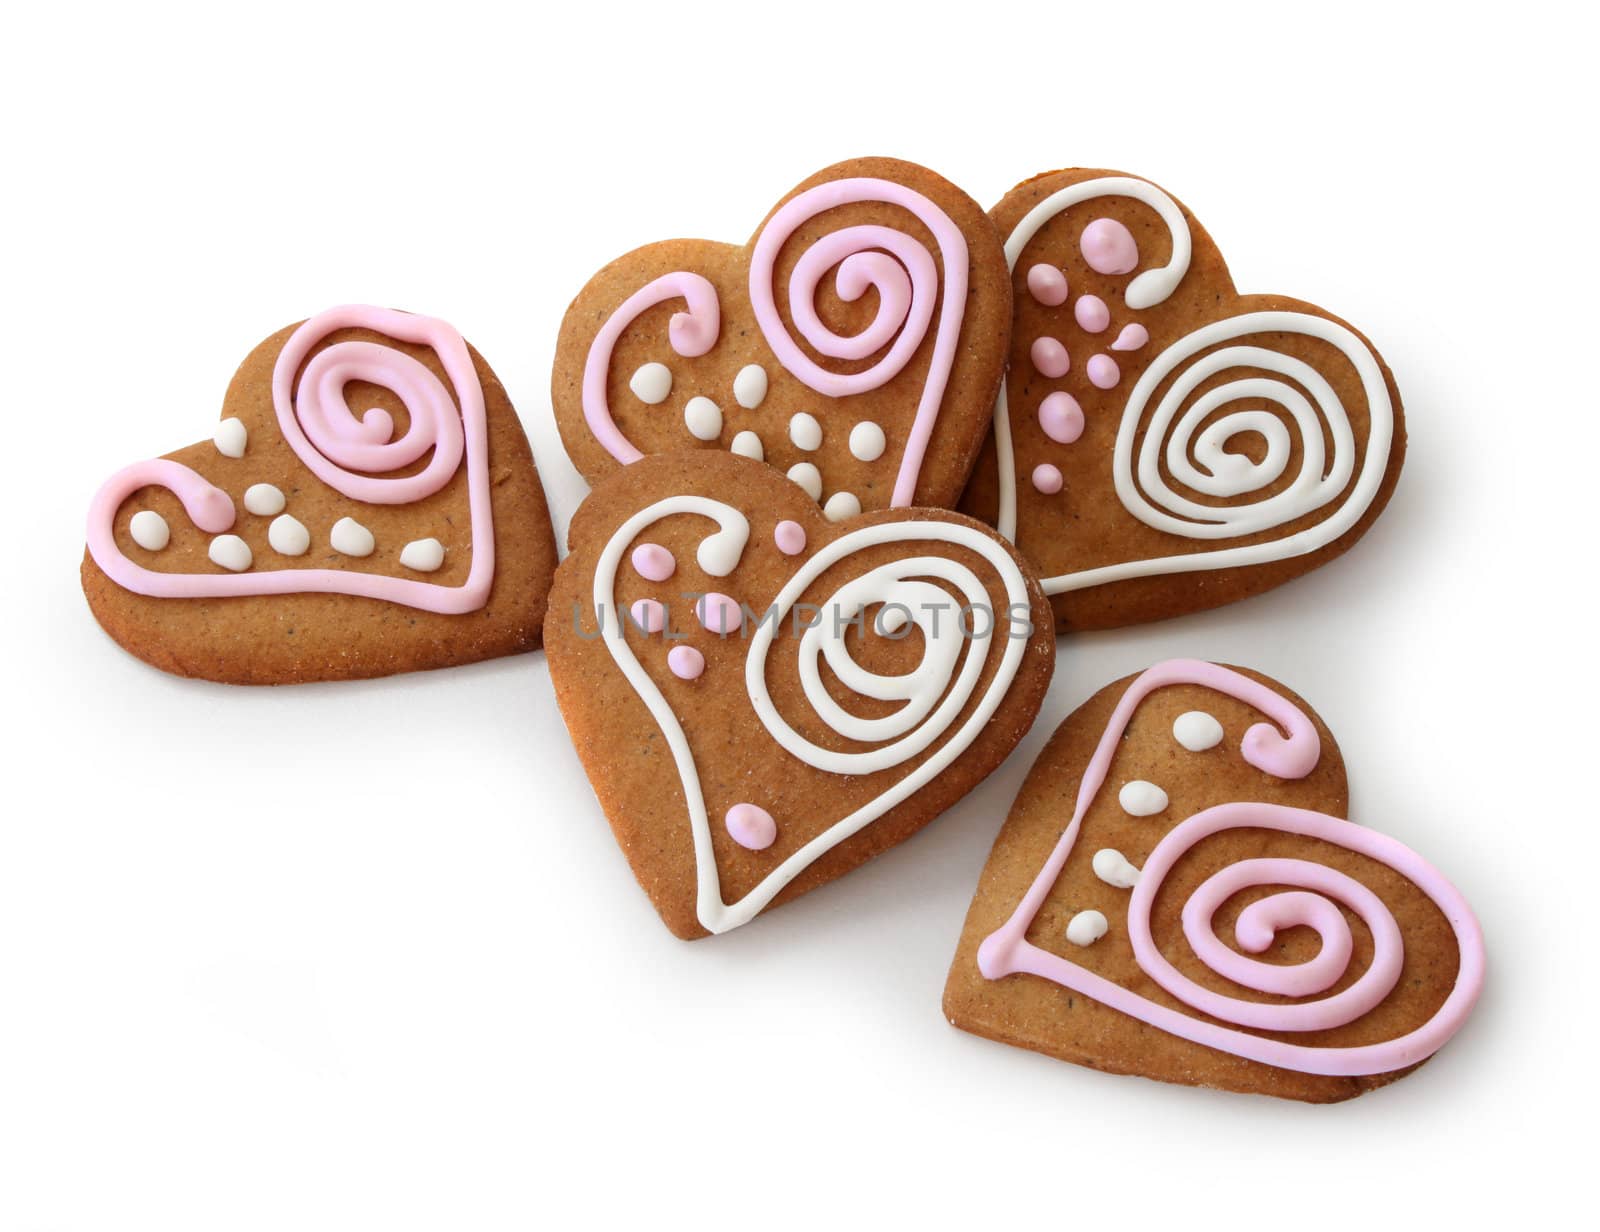 Heart shape ginger breads decorated with pink and white sugar glazi